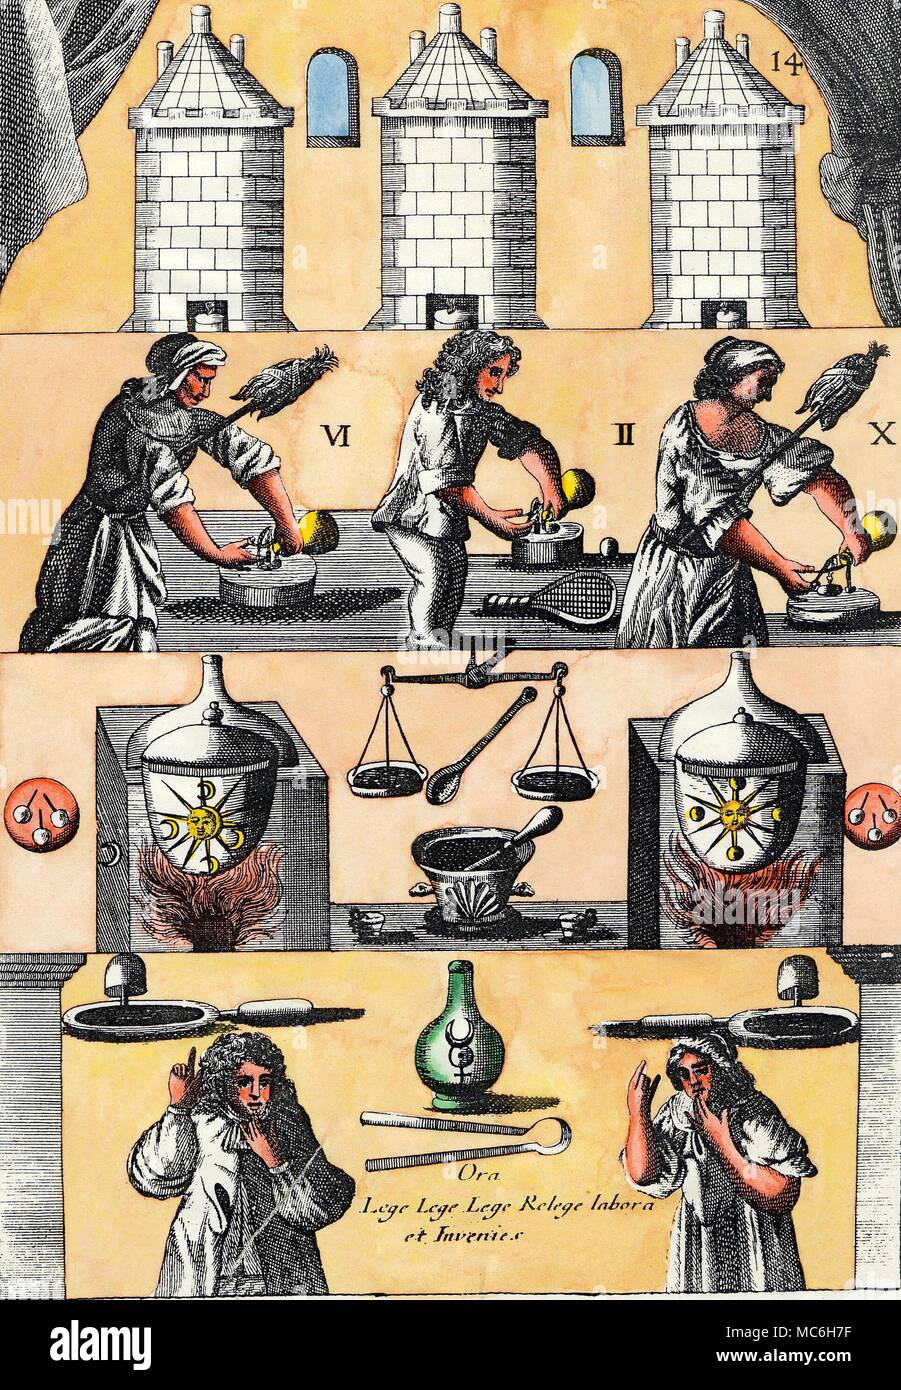 ALCHEMY - MUTUS LIBER, OR SILENT BOOK - PLATE 14. Plate 14 in the Mutus series is in some ways the most enigmatic. The emphasis in each of the top three registers is on the number 3 - the furnaces (the types of transformation), three people, and three distinct alchemical operations. This triadic symbolism seems to point to the three-fold man (Thinking Feeling and Willing) which is expressed in the Three Principles of Salt, Mercury and Sulphur, of the alchemical credo. This connexion is confirmed by the scales, in the middle of the third register down, for Mercury is the balance, the uni Stock Photo